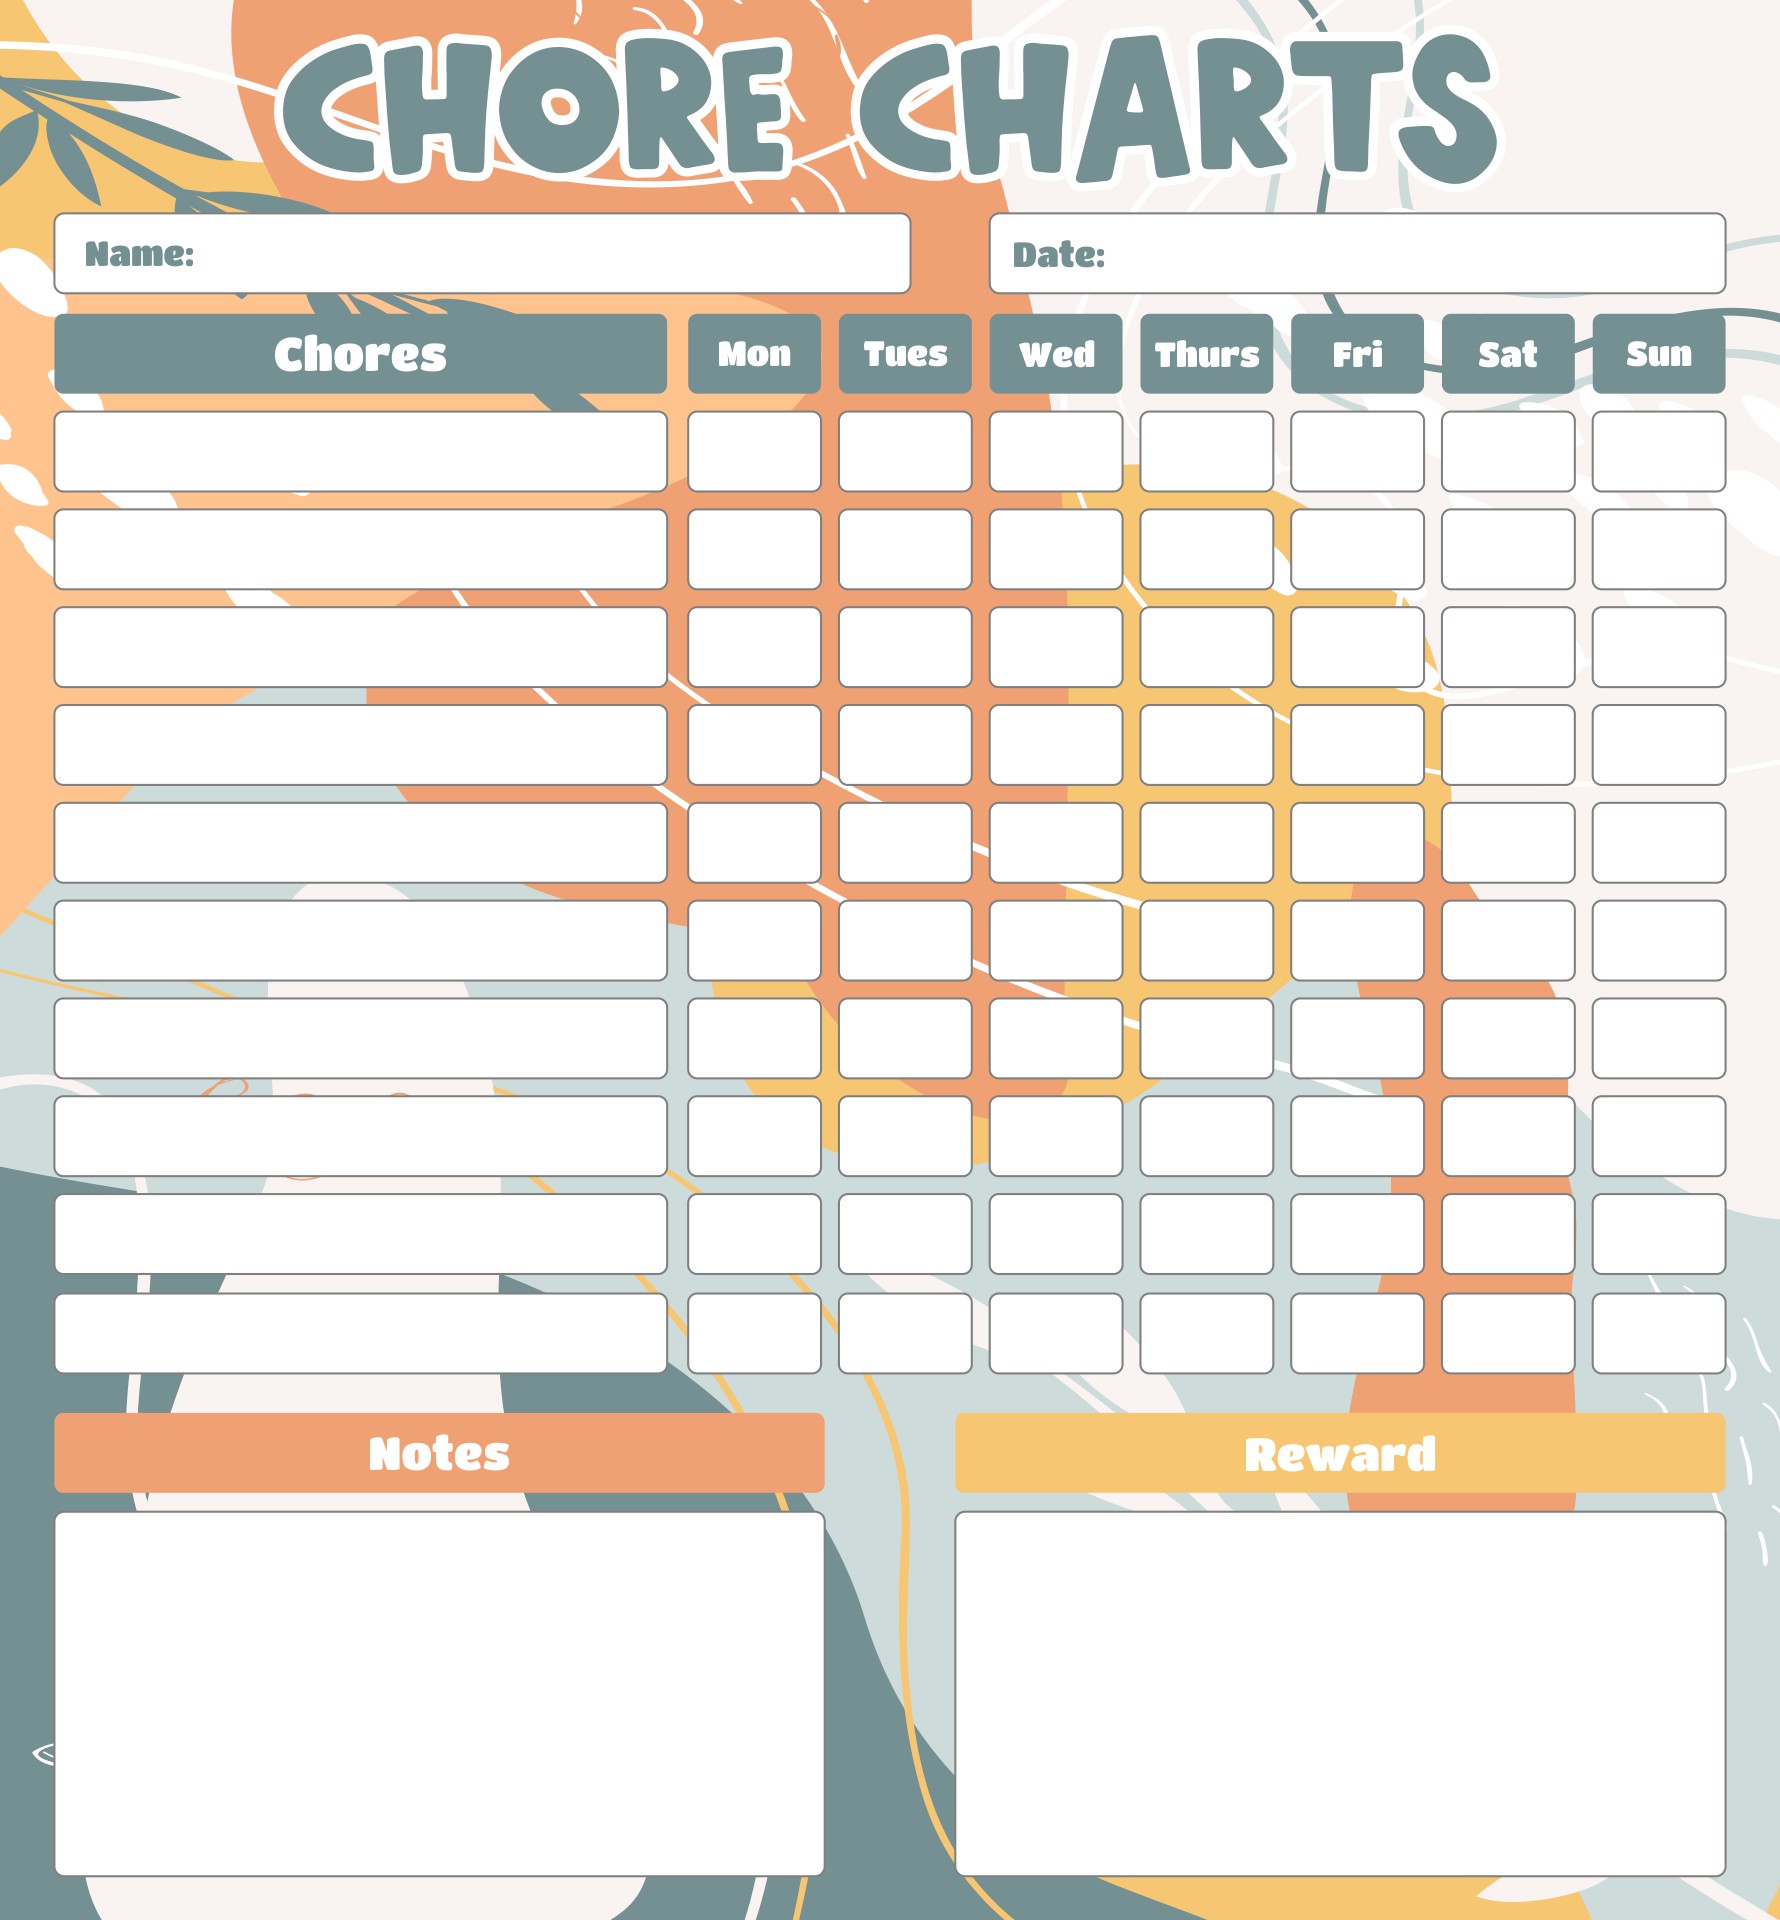 43-free-chore-chart-templates-for-kids-template-lab-intended-for